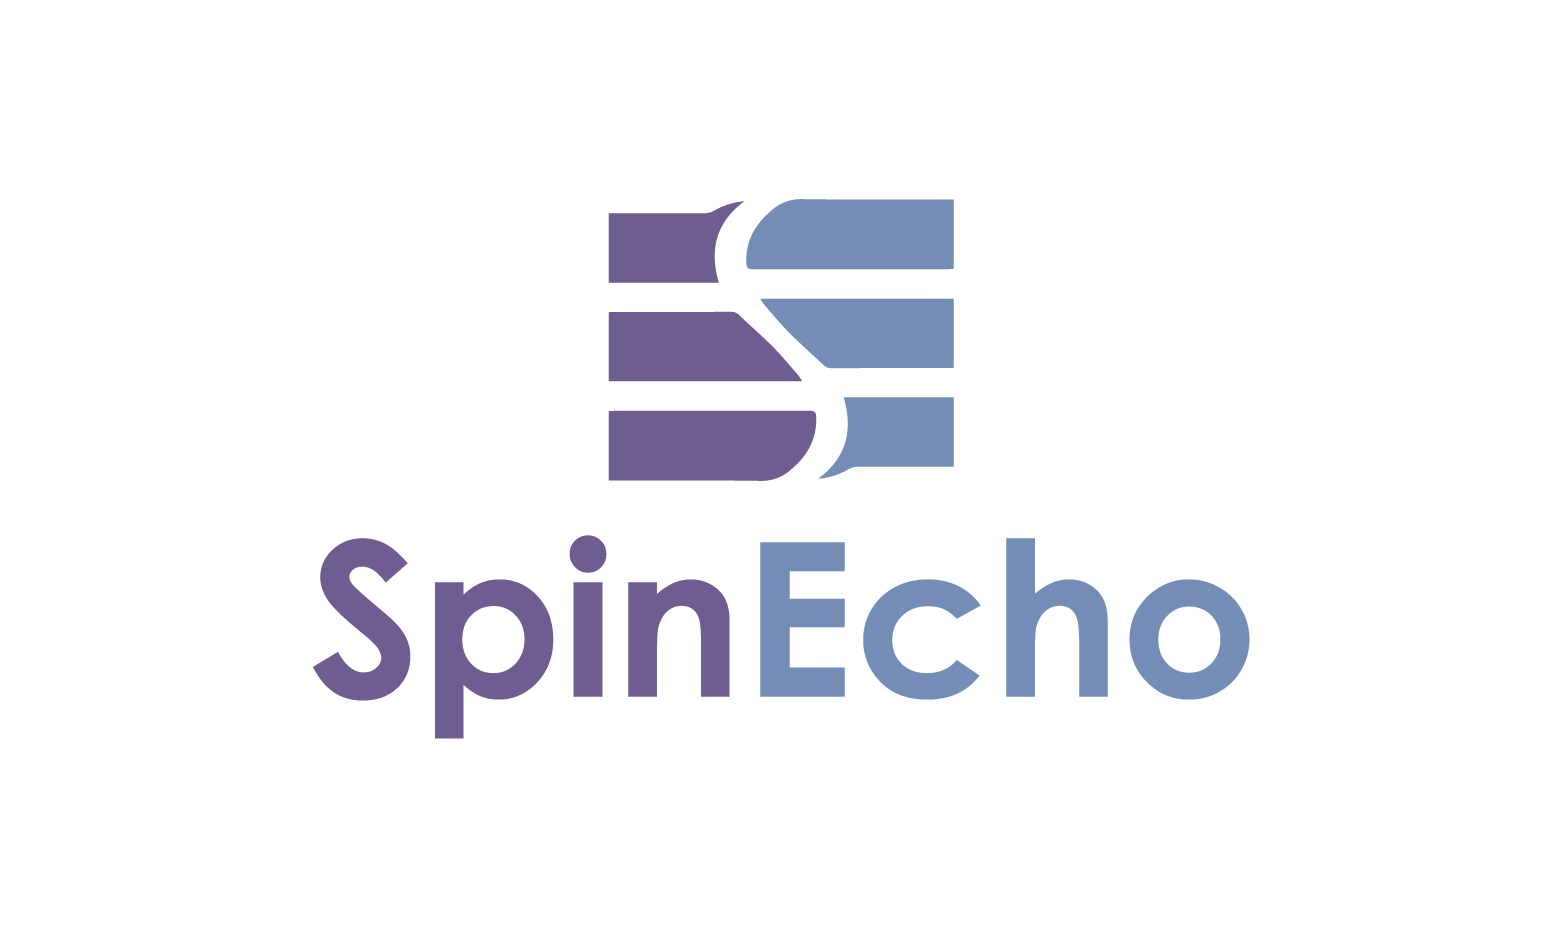 SpinEcho.com - Creative brandable domain for sale